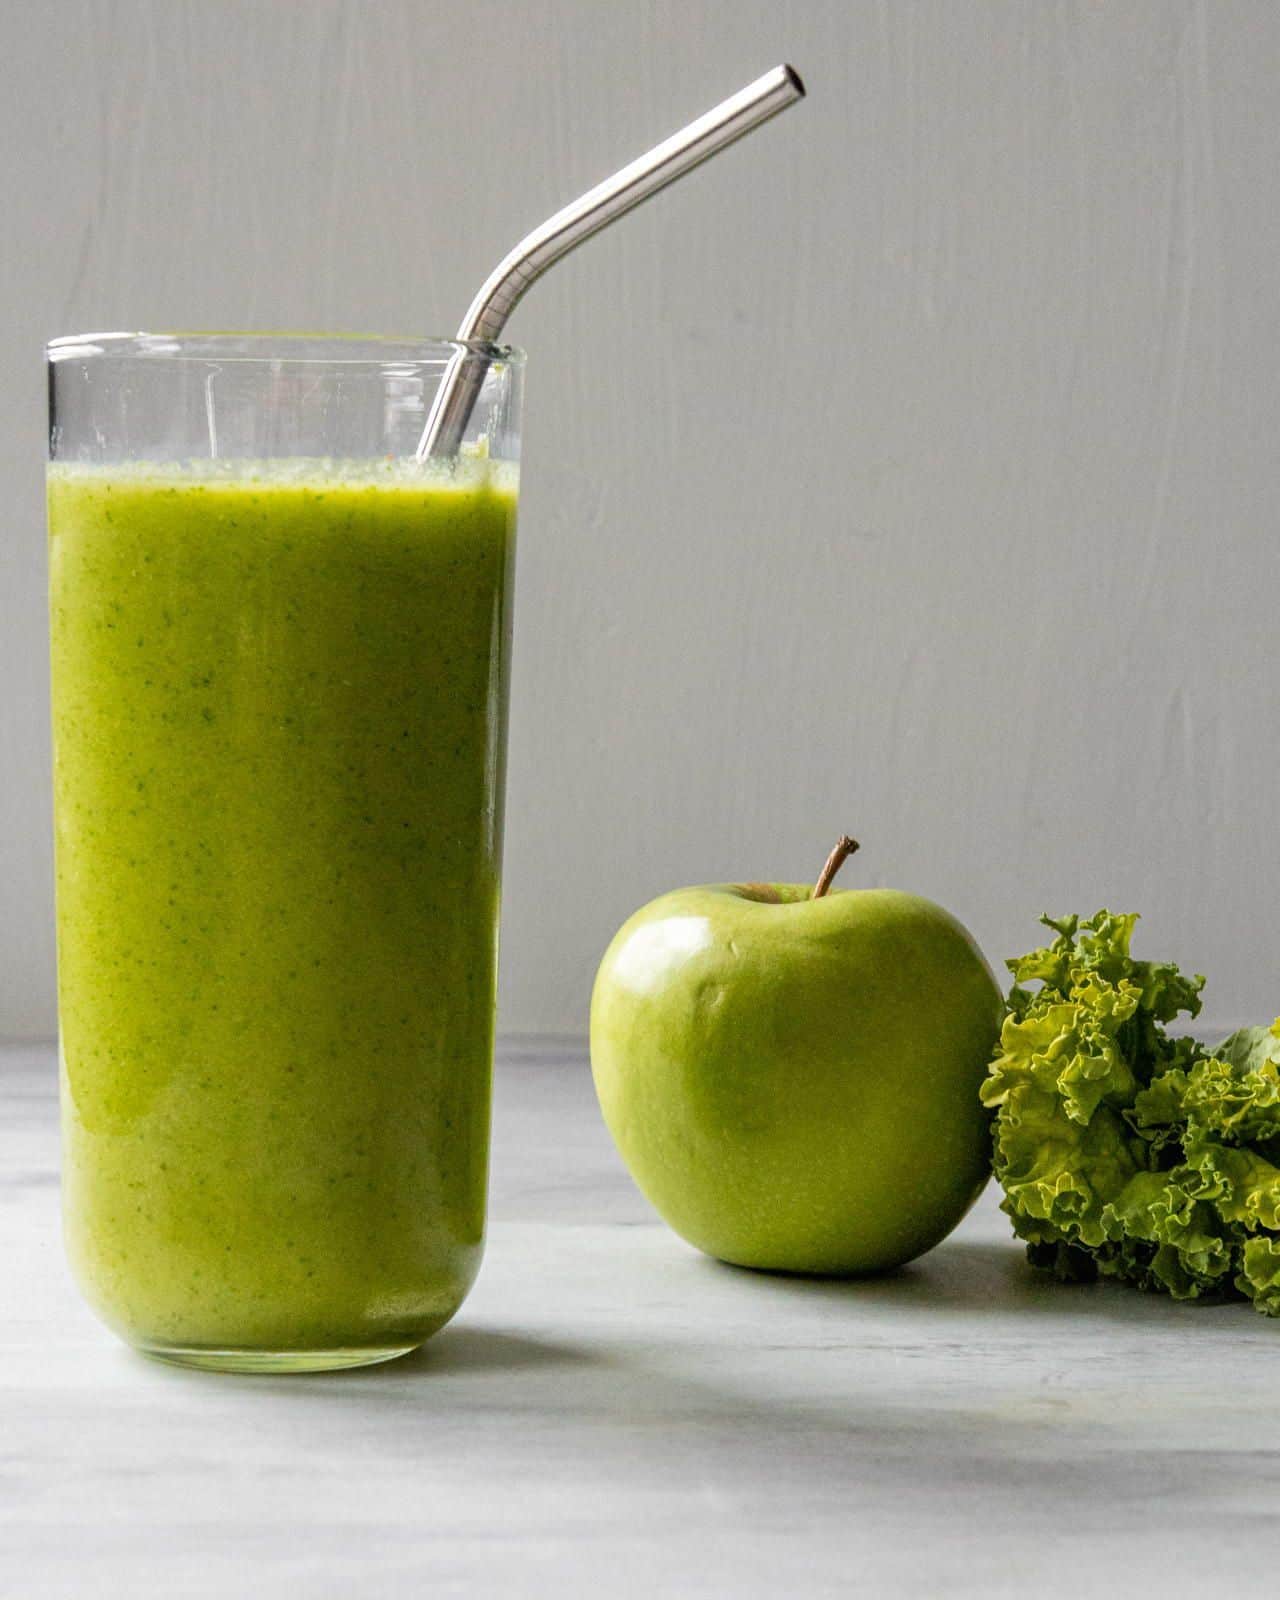 This Apple Kale Smoothie is the perfect way to start your morning.⁣
⁣
Apple Kale Smoothie 🍏🥬⁣
• 3/4 cup diced apple, about a half of an apple⁣
• 1/4 cup kale, washed⁣
• 1/4 cup frozen mangos⁣
• 1/2 banana⁣
• 1/4 cup frozen Peaches⁣
• 3/4 cup coconut water, or regular water⁣
• Ice⁣
⁣
#smoothies #healthysmoothies #healthyrecipes #breakfastideas #easysnacks #healthysnacks #smoothie #smoothierecipes #easyrecipes #easybreakfast #kale